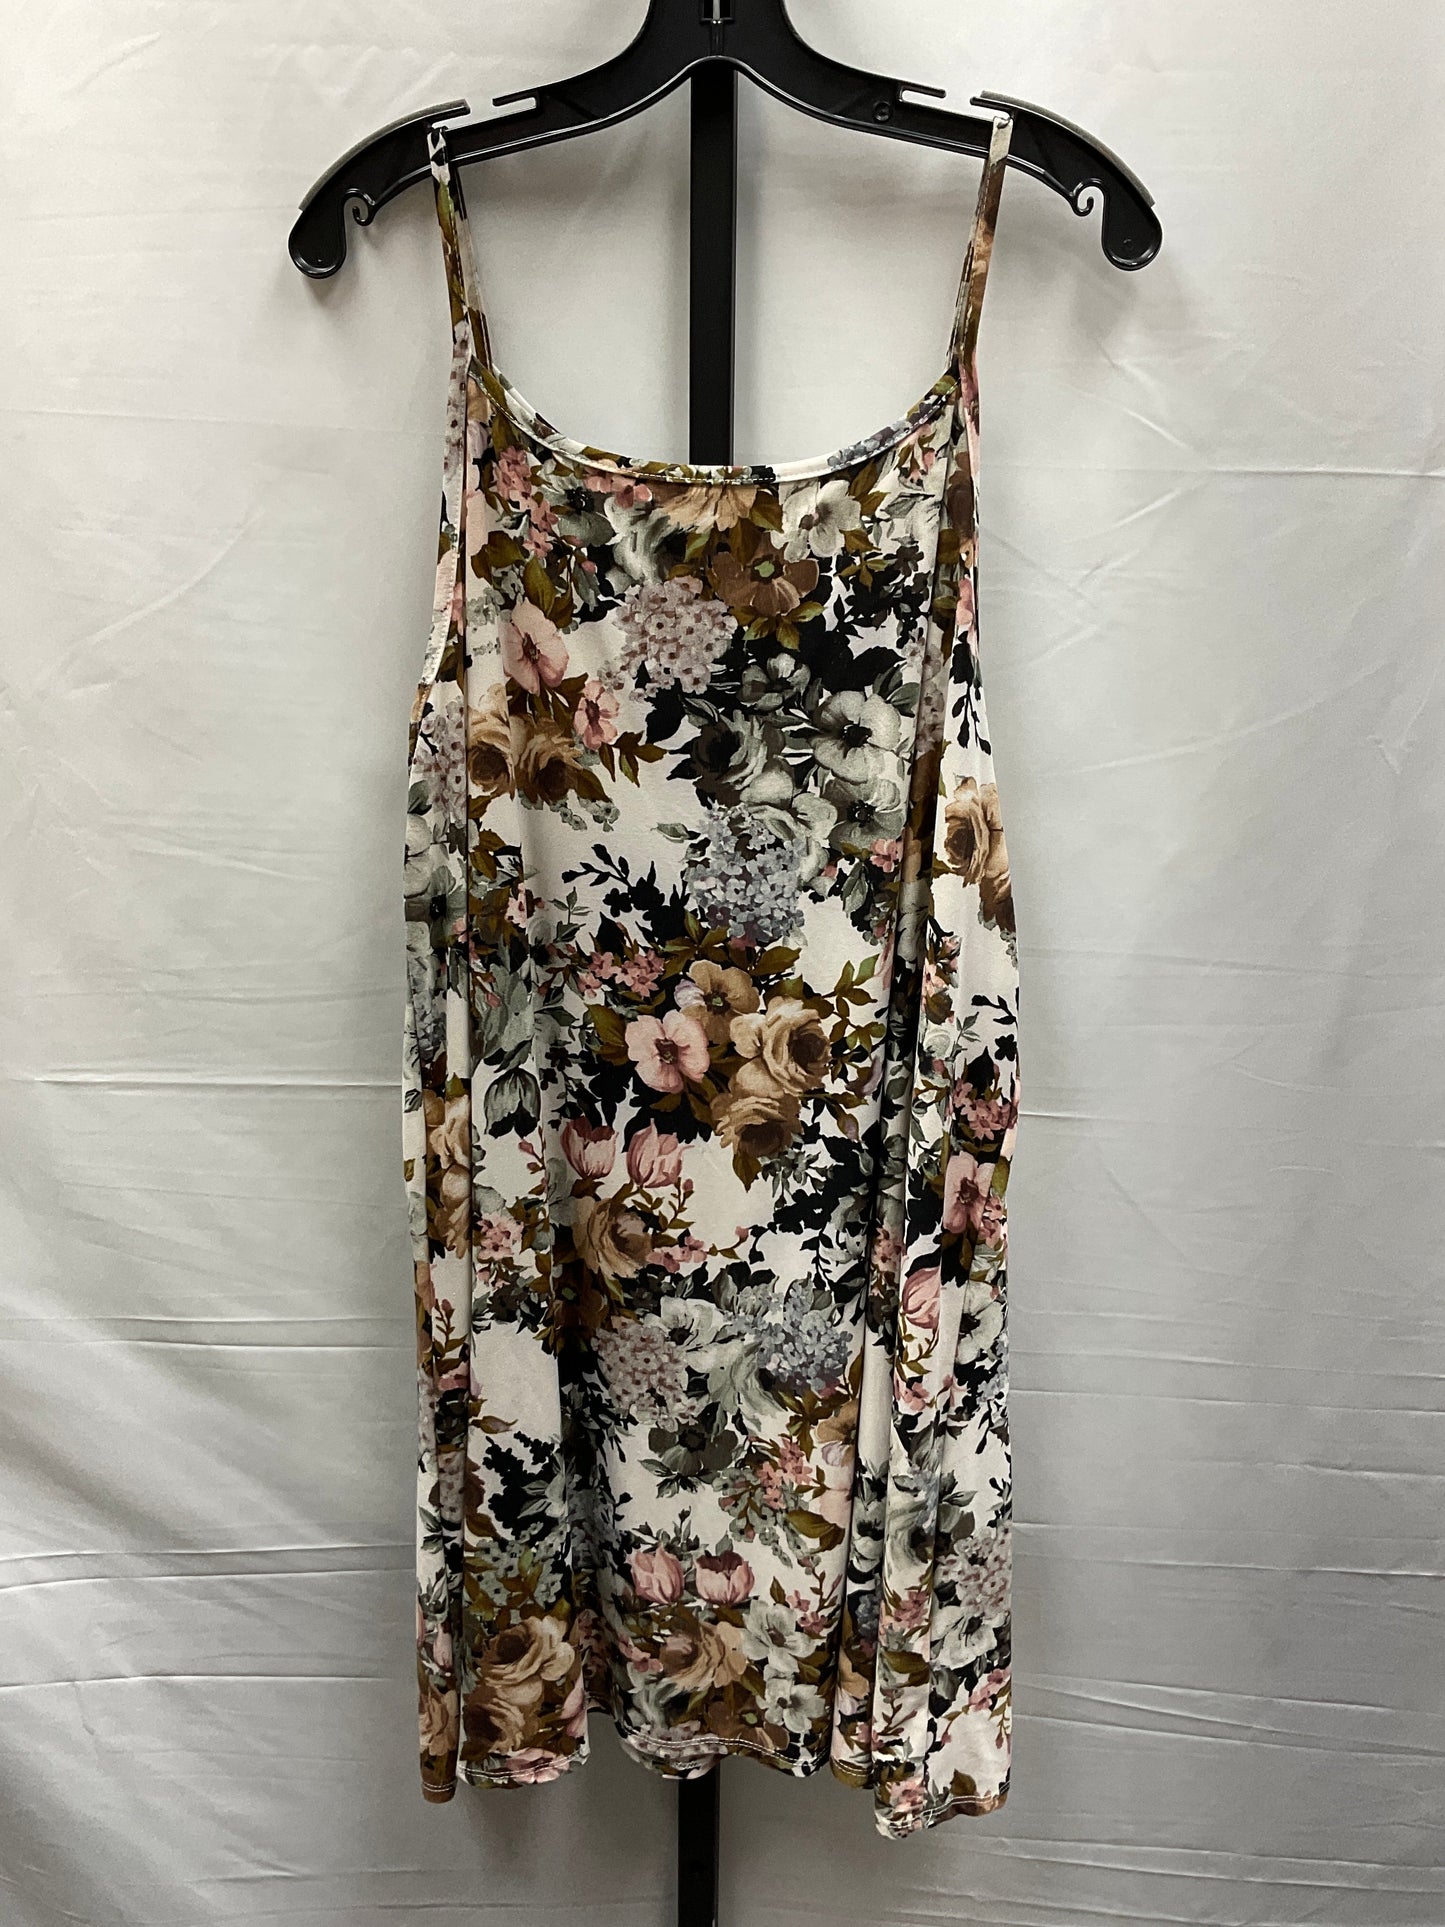 Floral Print Dress Casual Short Vibe, Size 3x